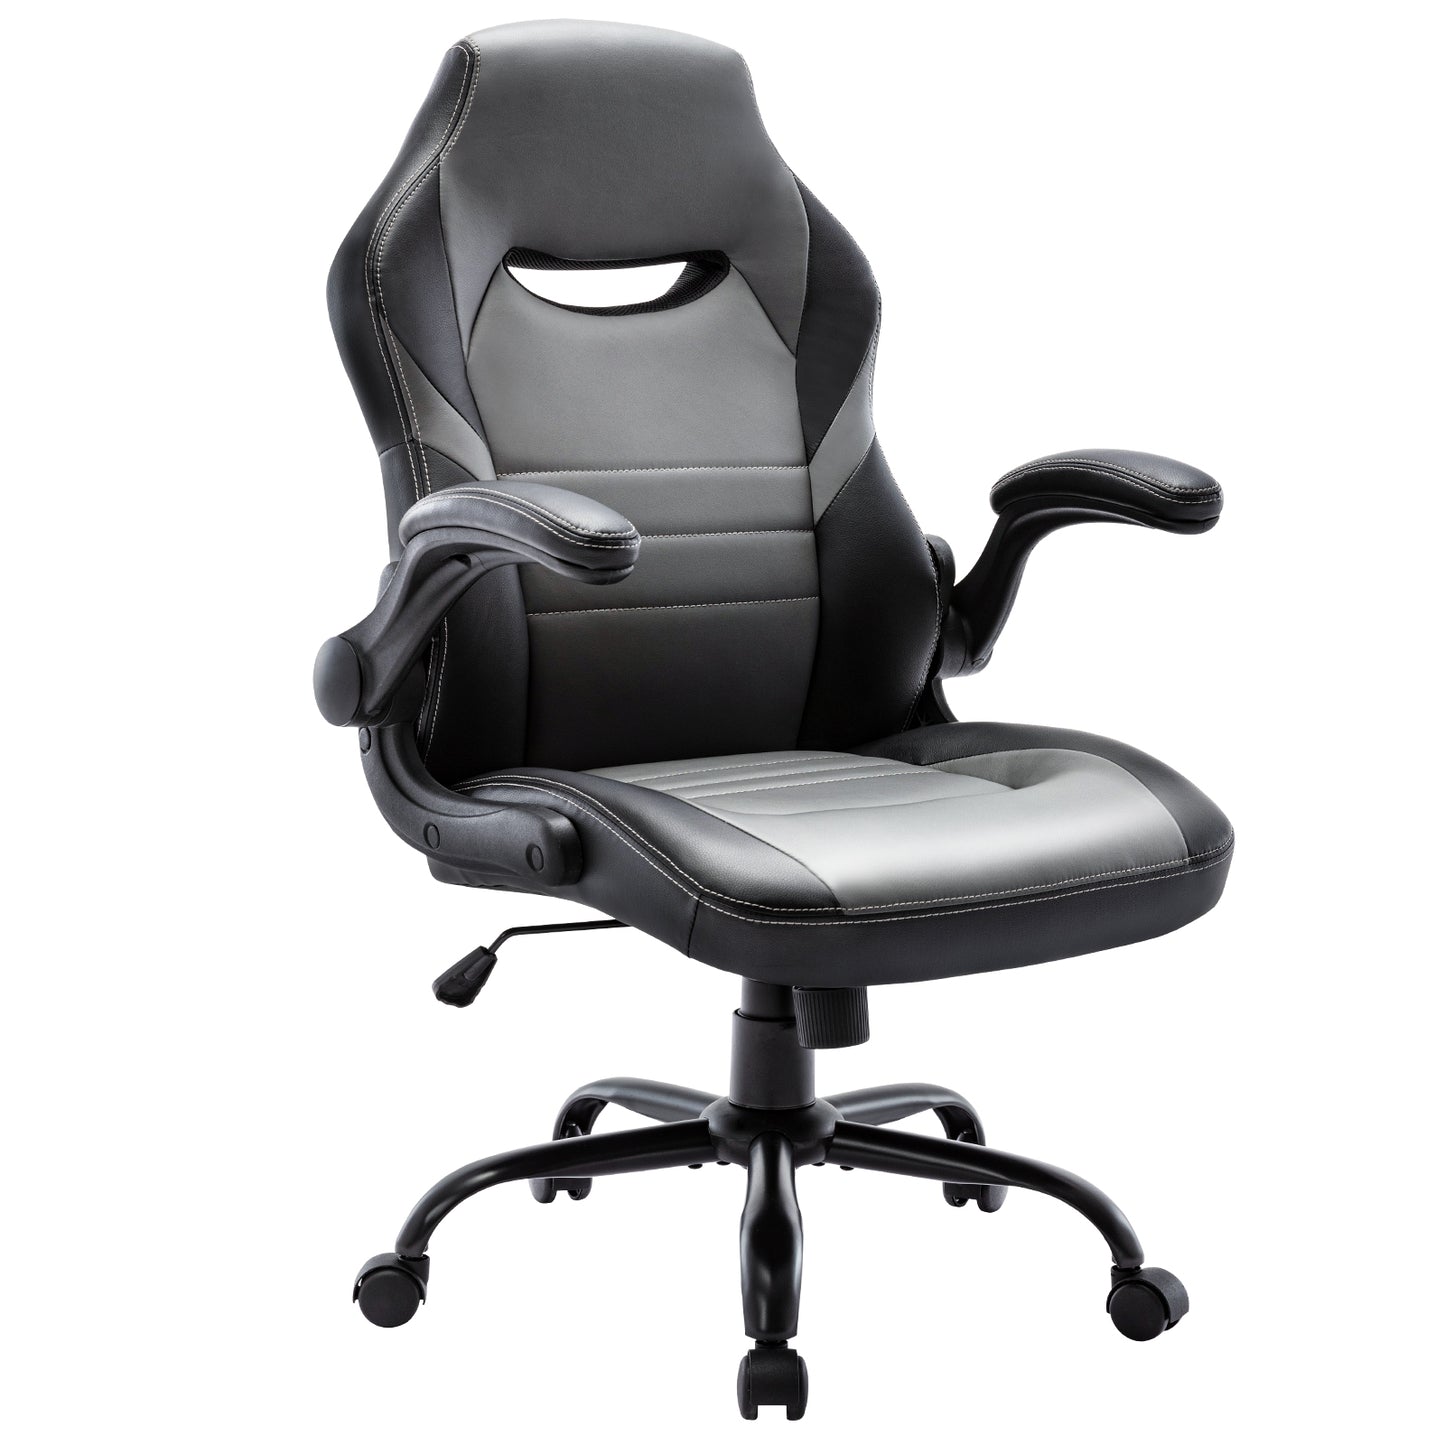 Flip-Up Arms Office Gaming Chair, Ergonomic Swivel Computer Racing Game Chair Adjustable Desk Task Chair (Black)